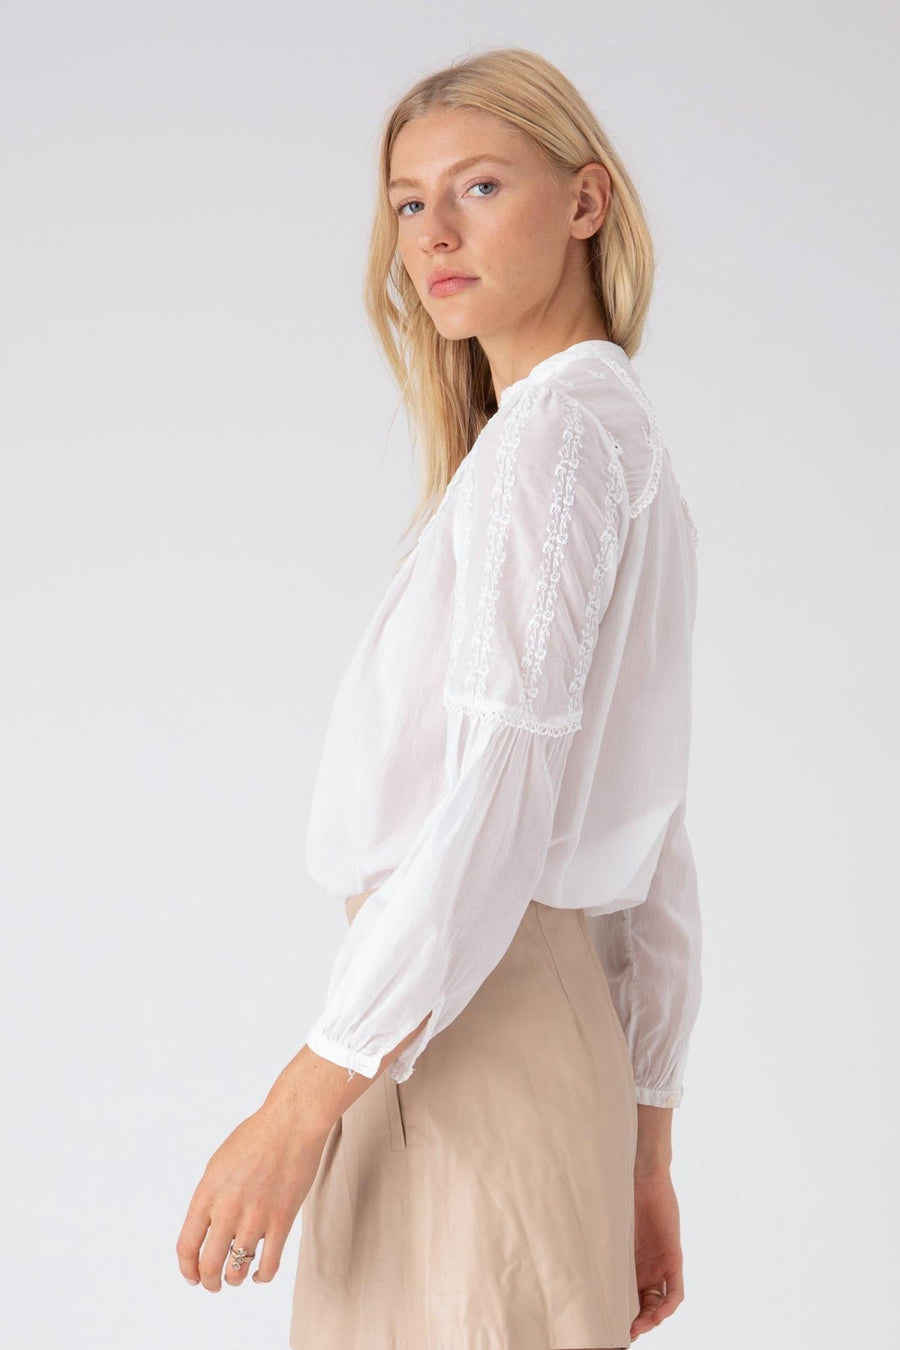 ATHENA LONG SLEEVE TOP, WHITE - Burning Torch Online Boutique